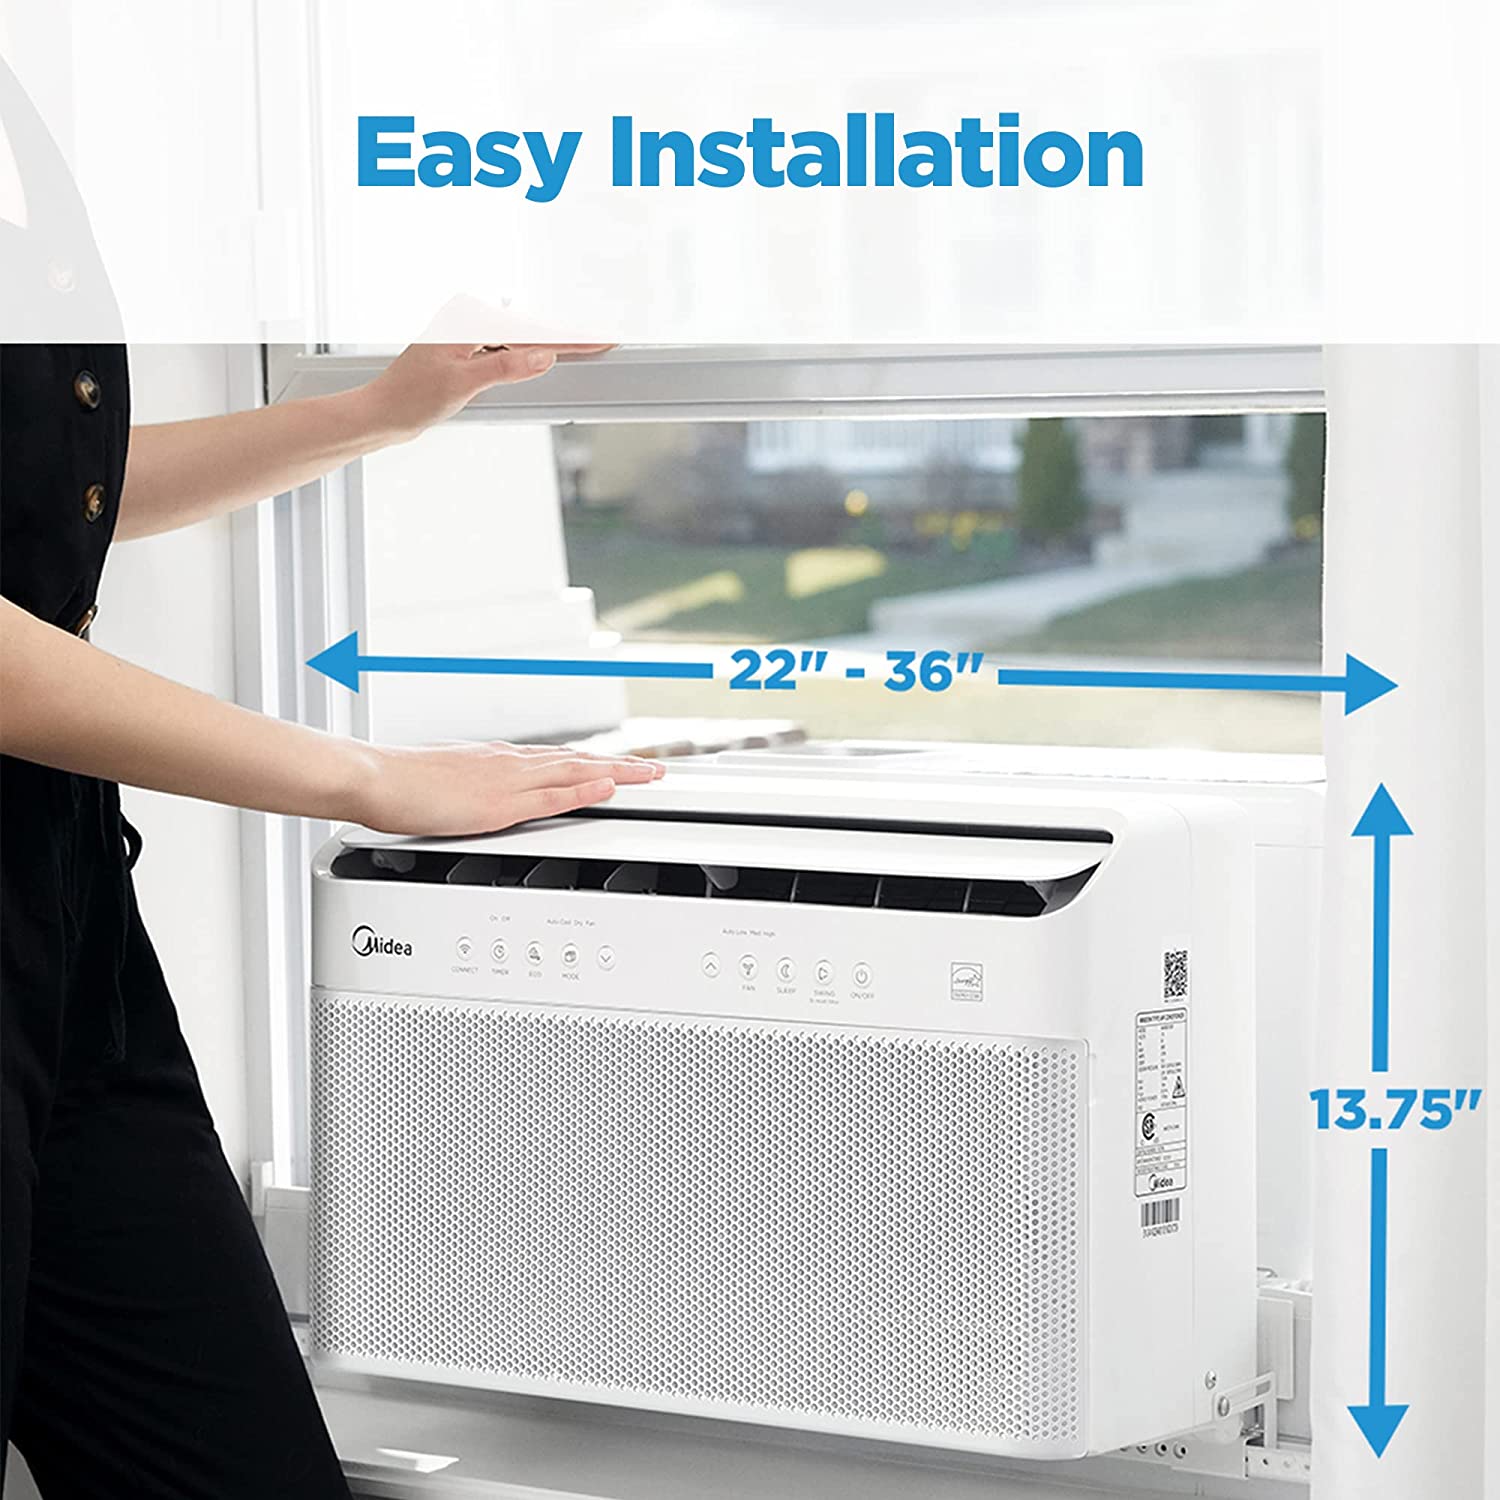 Midea 12,000 BTU U-Shaped Smart Inverter Window Air Conditioner–Cools up to 550 Sq. Ft - $339.99 at Amazon